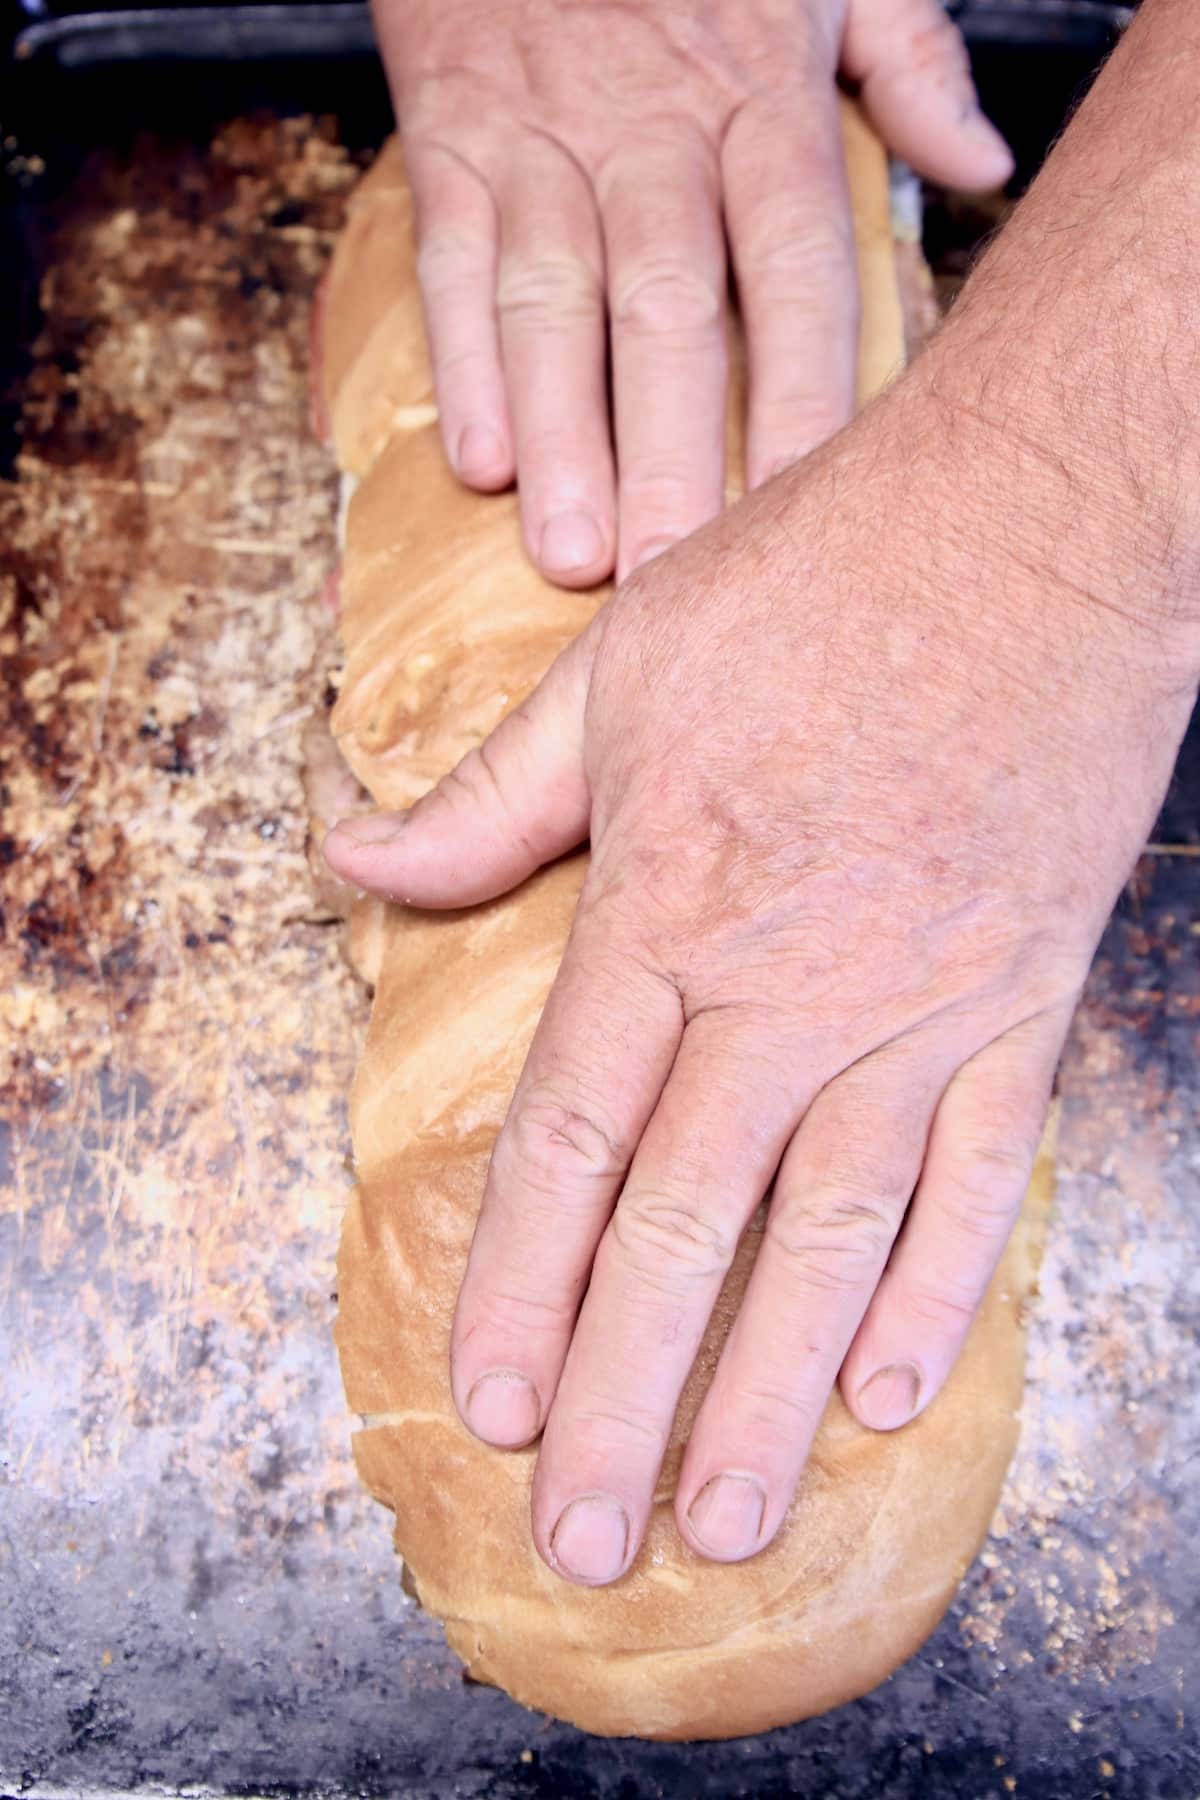 Smashing Italian loaf sandwich with hands.